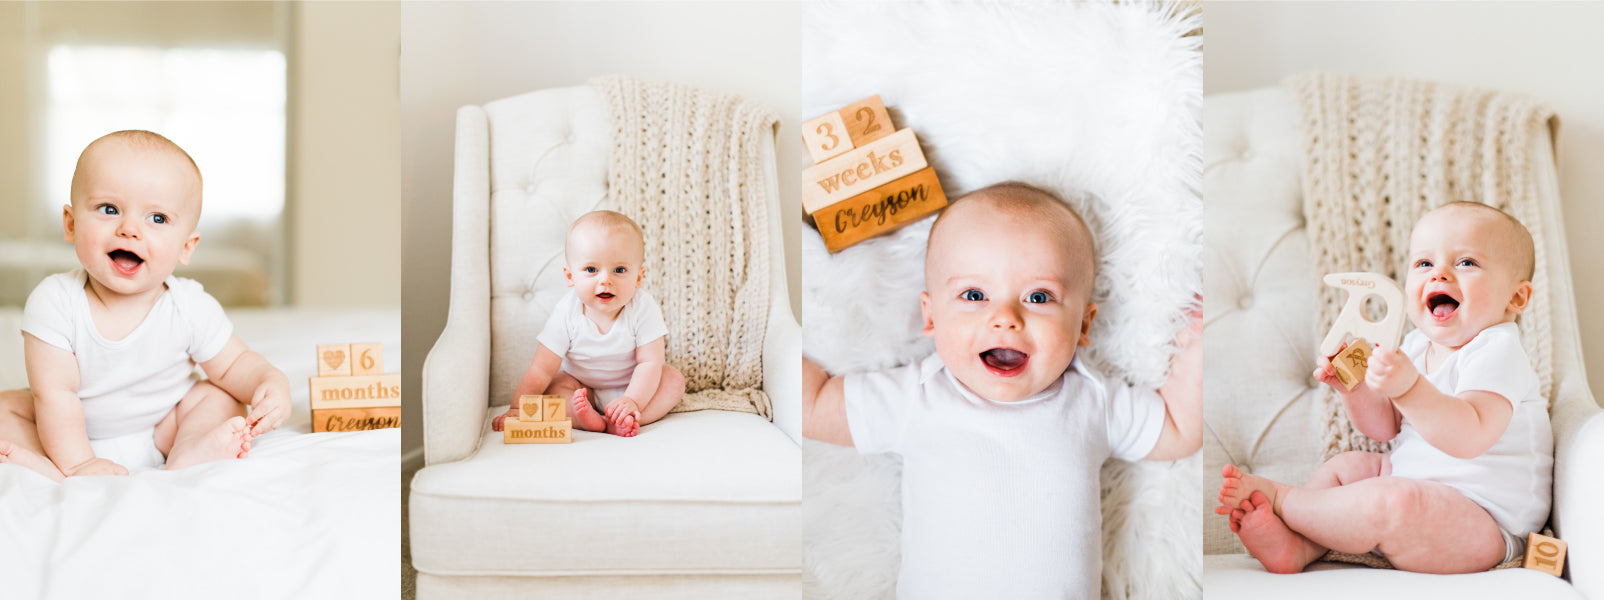 Chelsea Frandsen Photography and Smiling Tree Toys Photo Prop Blocks